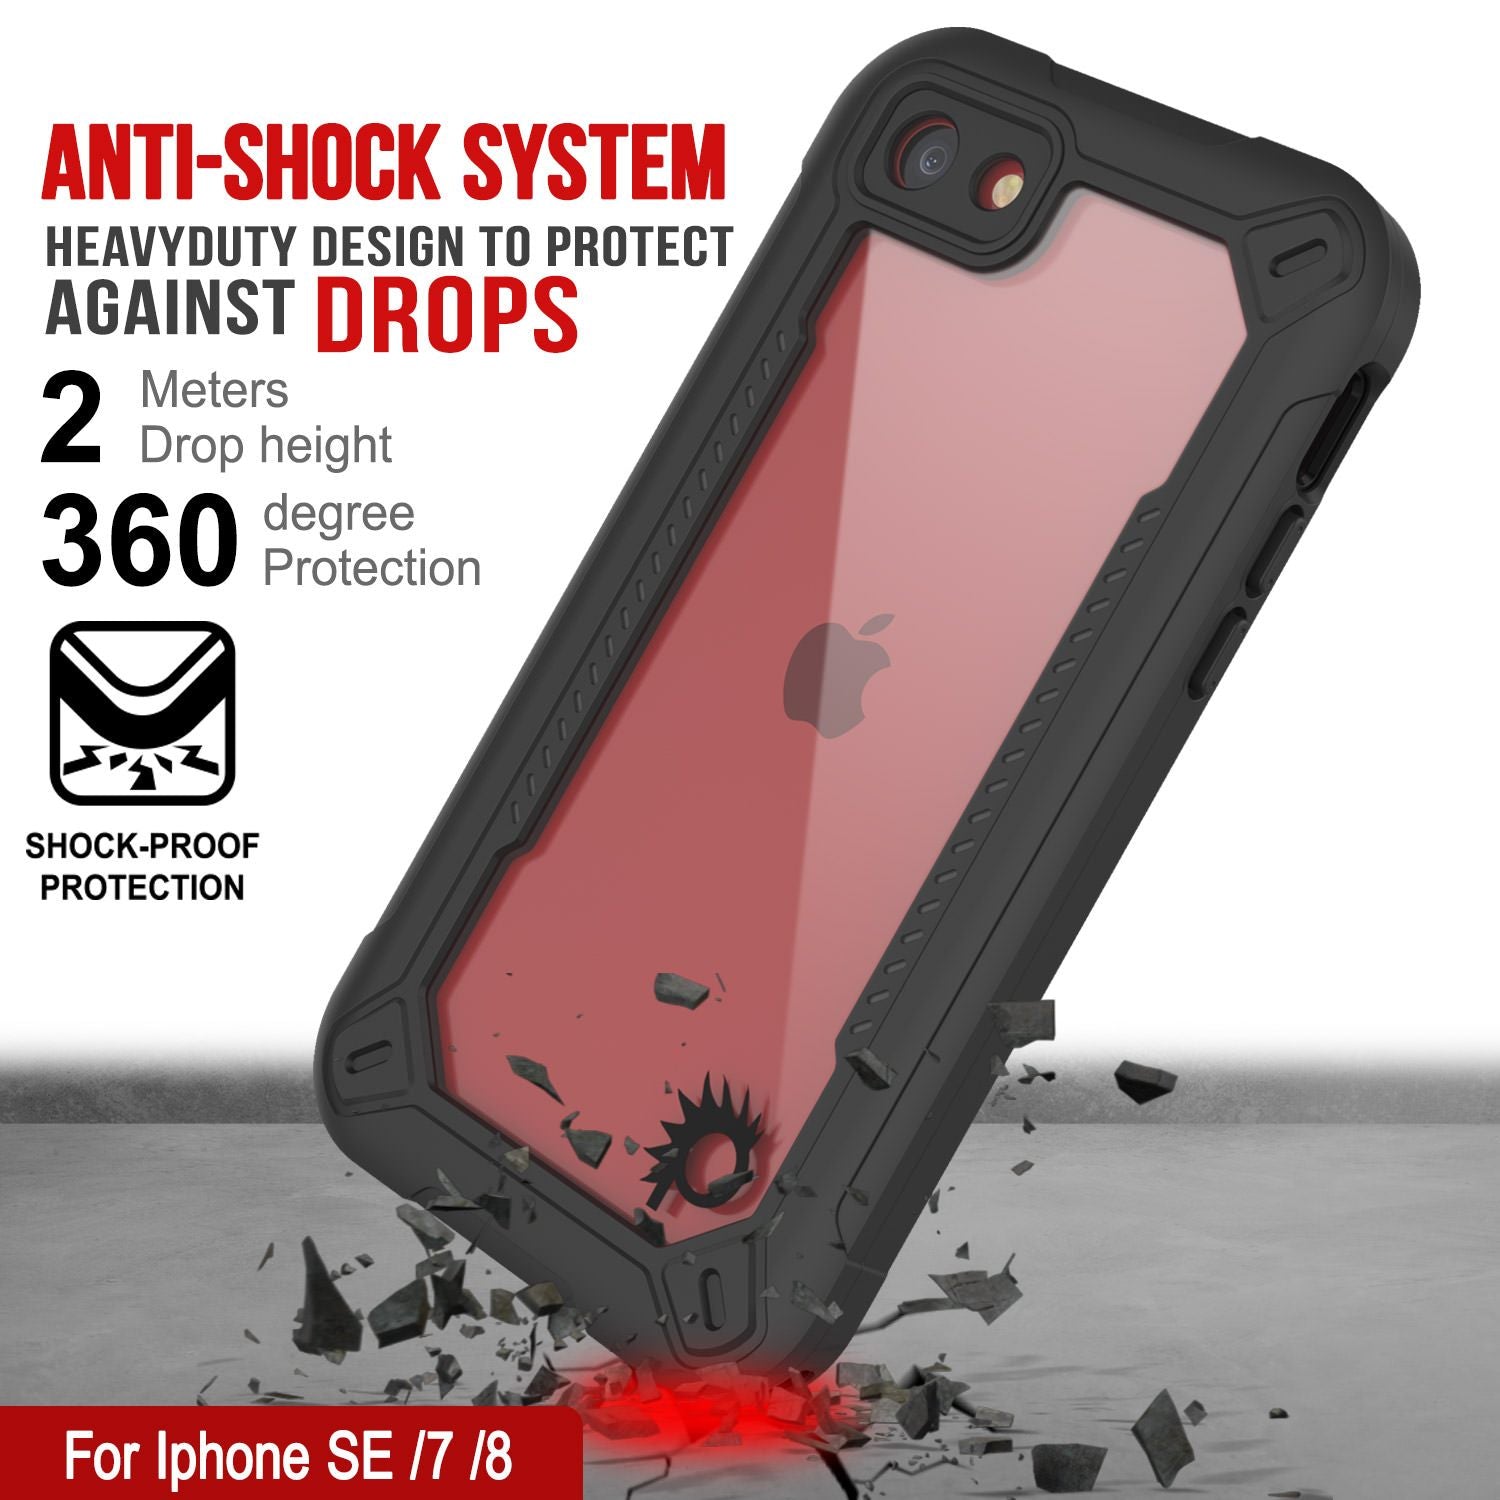 iPhone 8 Waterproof IP68 Case, Punkcase [Black]  [Maximus Series] [Slim Fit] [IP68 Certified] [Shockresistant] Clear Armor Cover with Screen Protector | Ultimate Protection